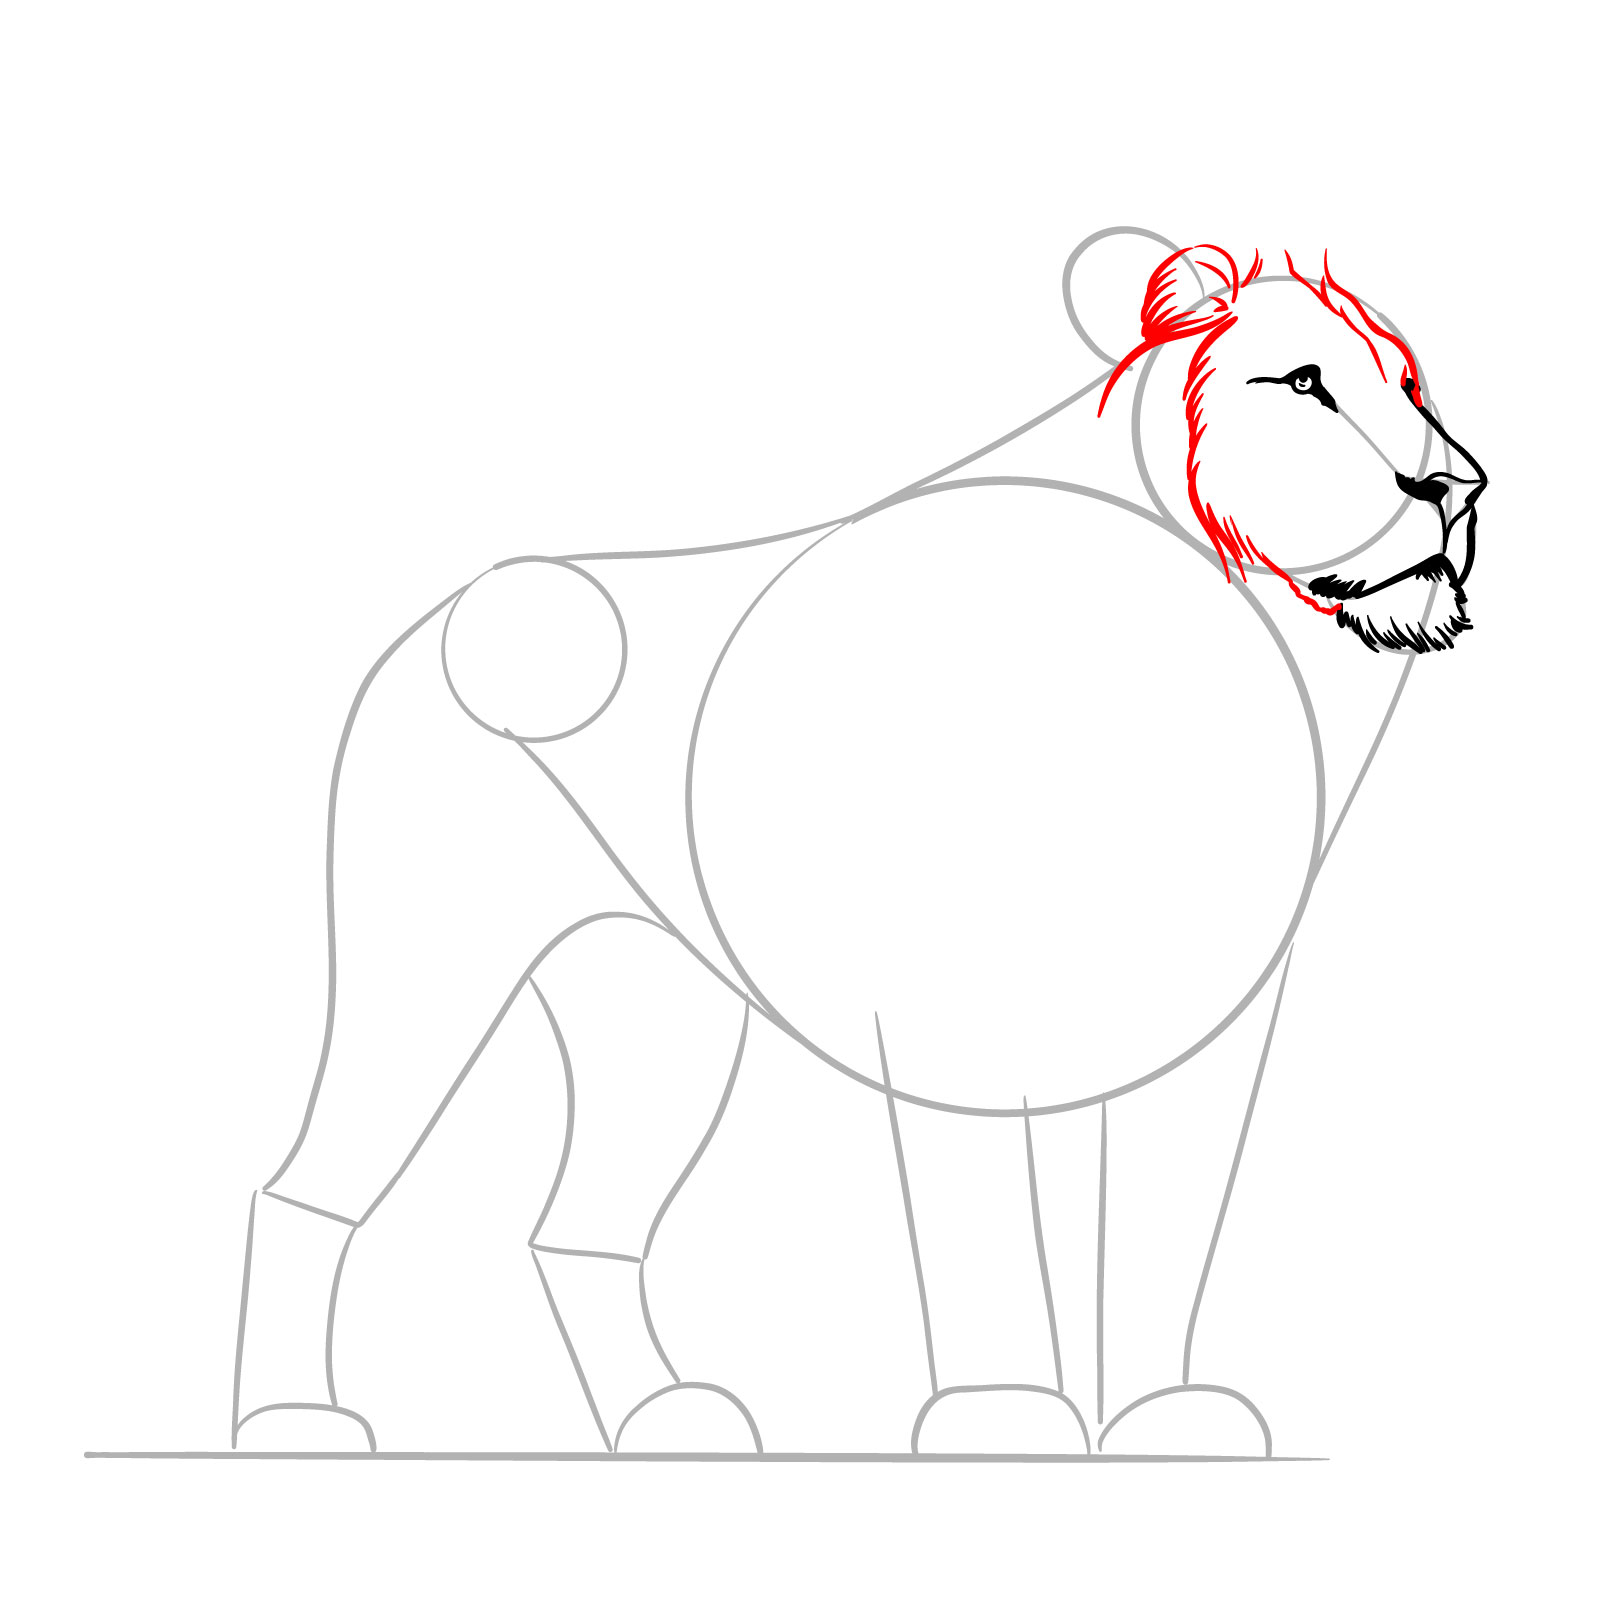 Creating the face frame with short lines in a standing lion sketch - step 06